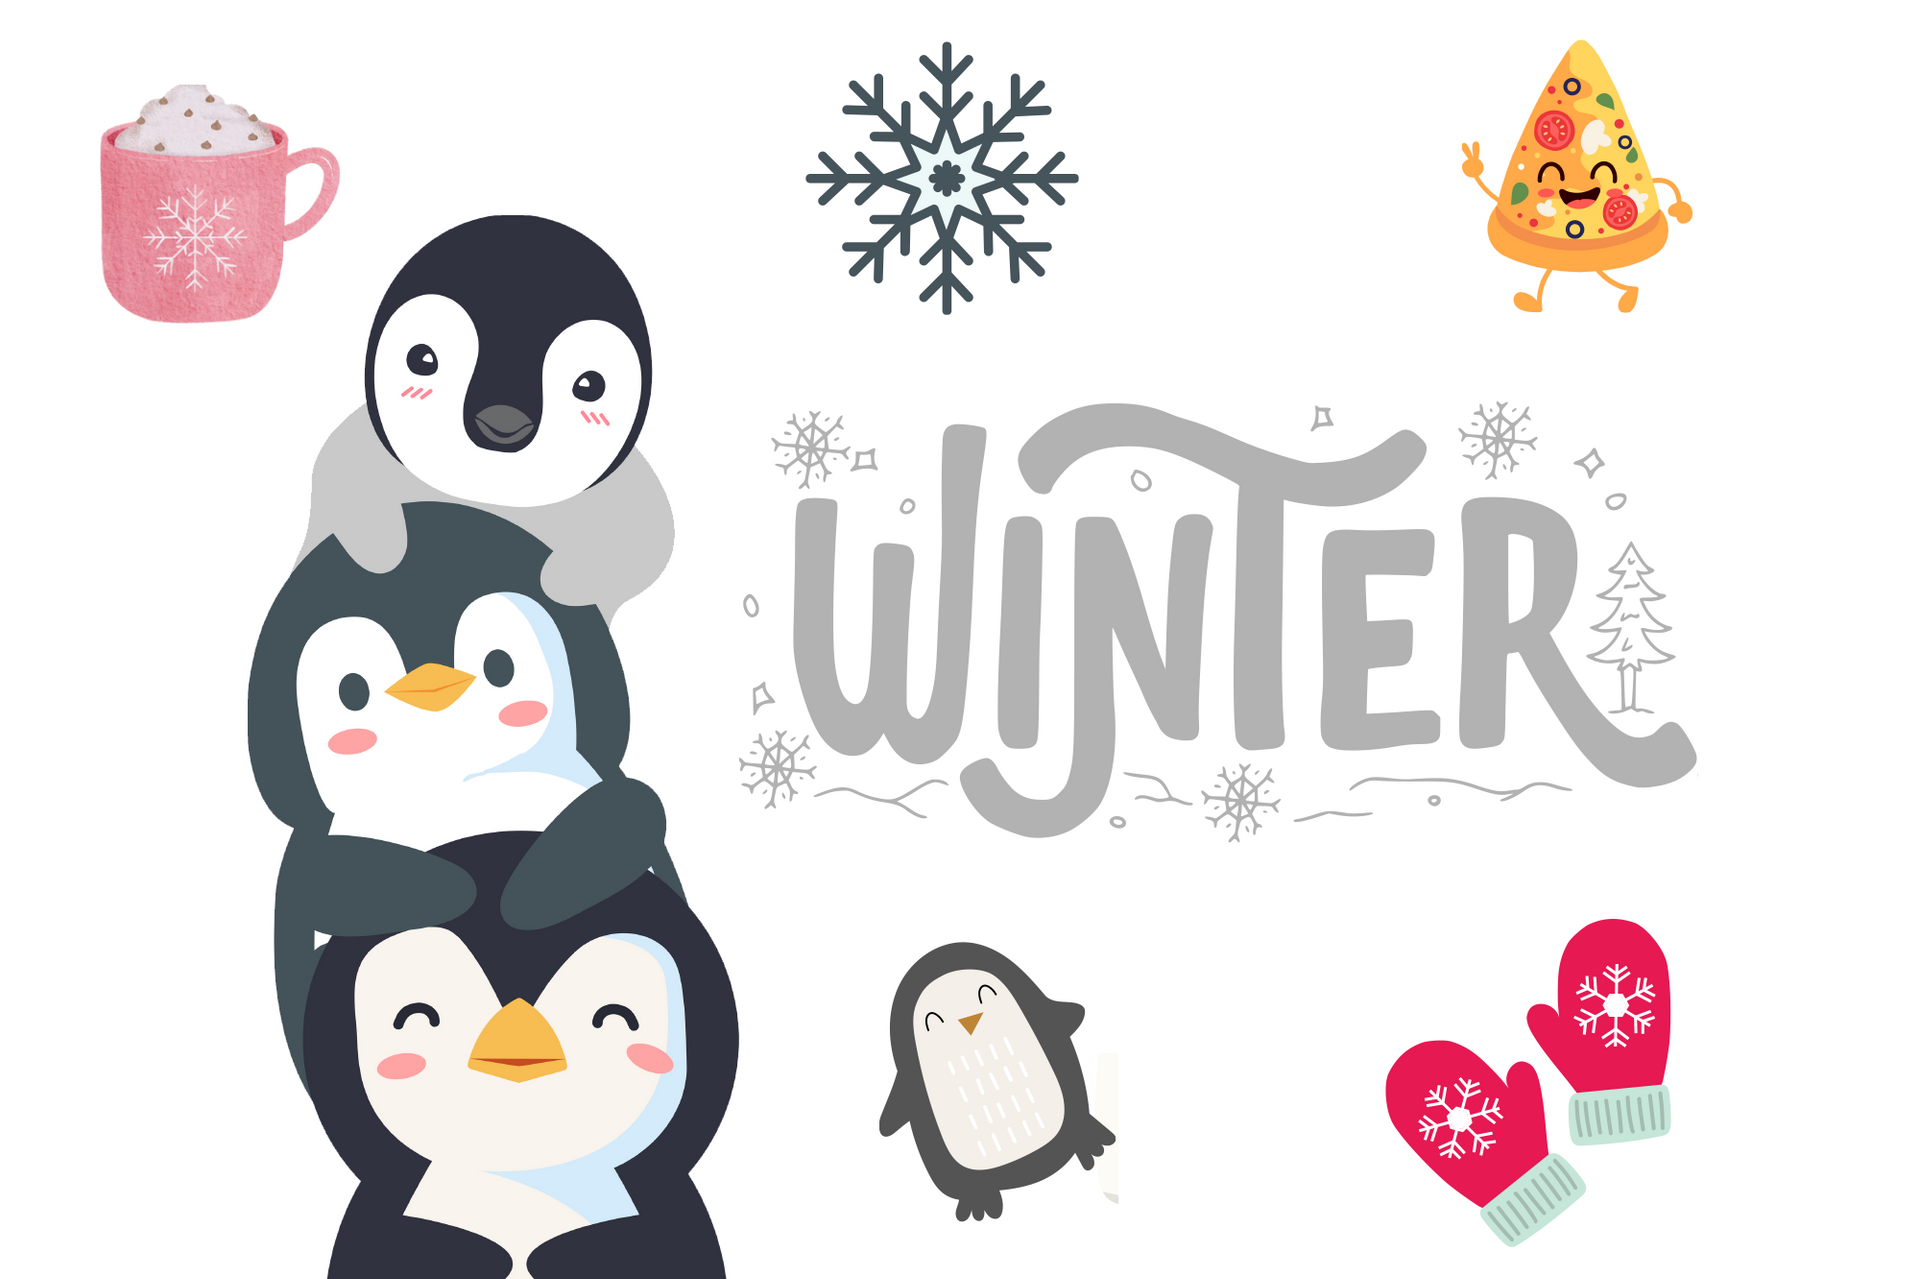 penguins are stacked on top of each other in front of the word winter